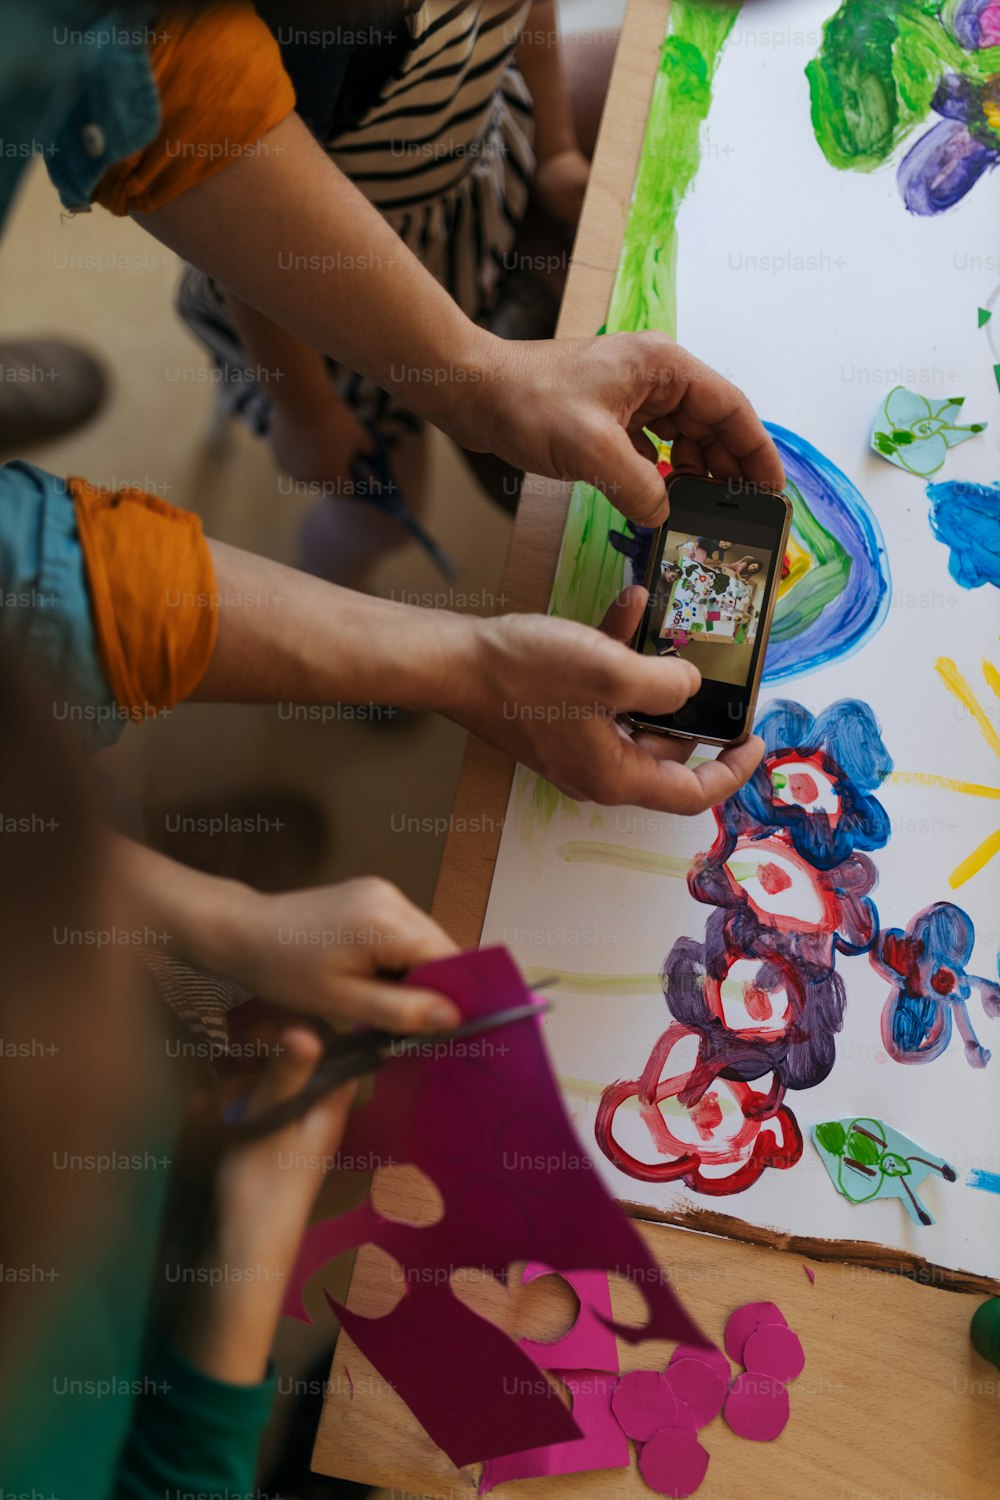 A close-up of teacher showing picture on smartphone to kids during creative art and craft class at school